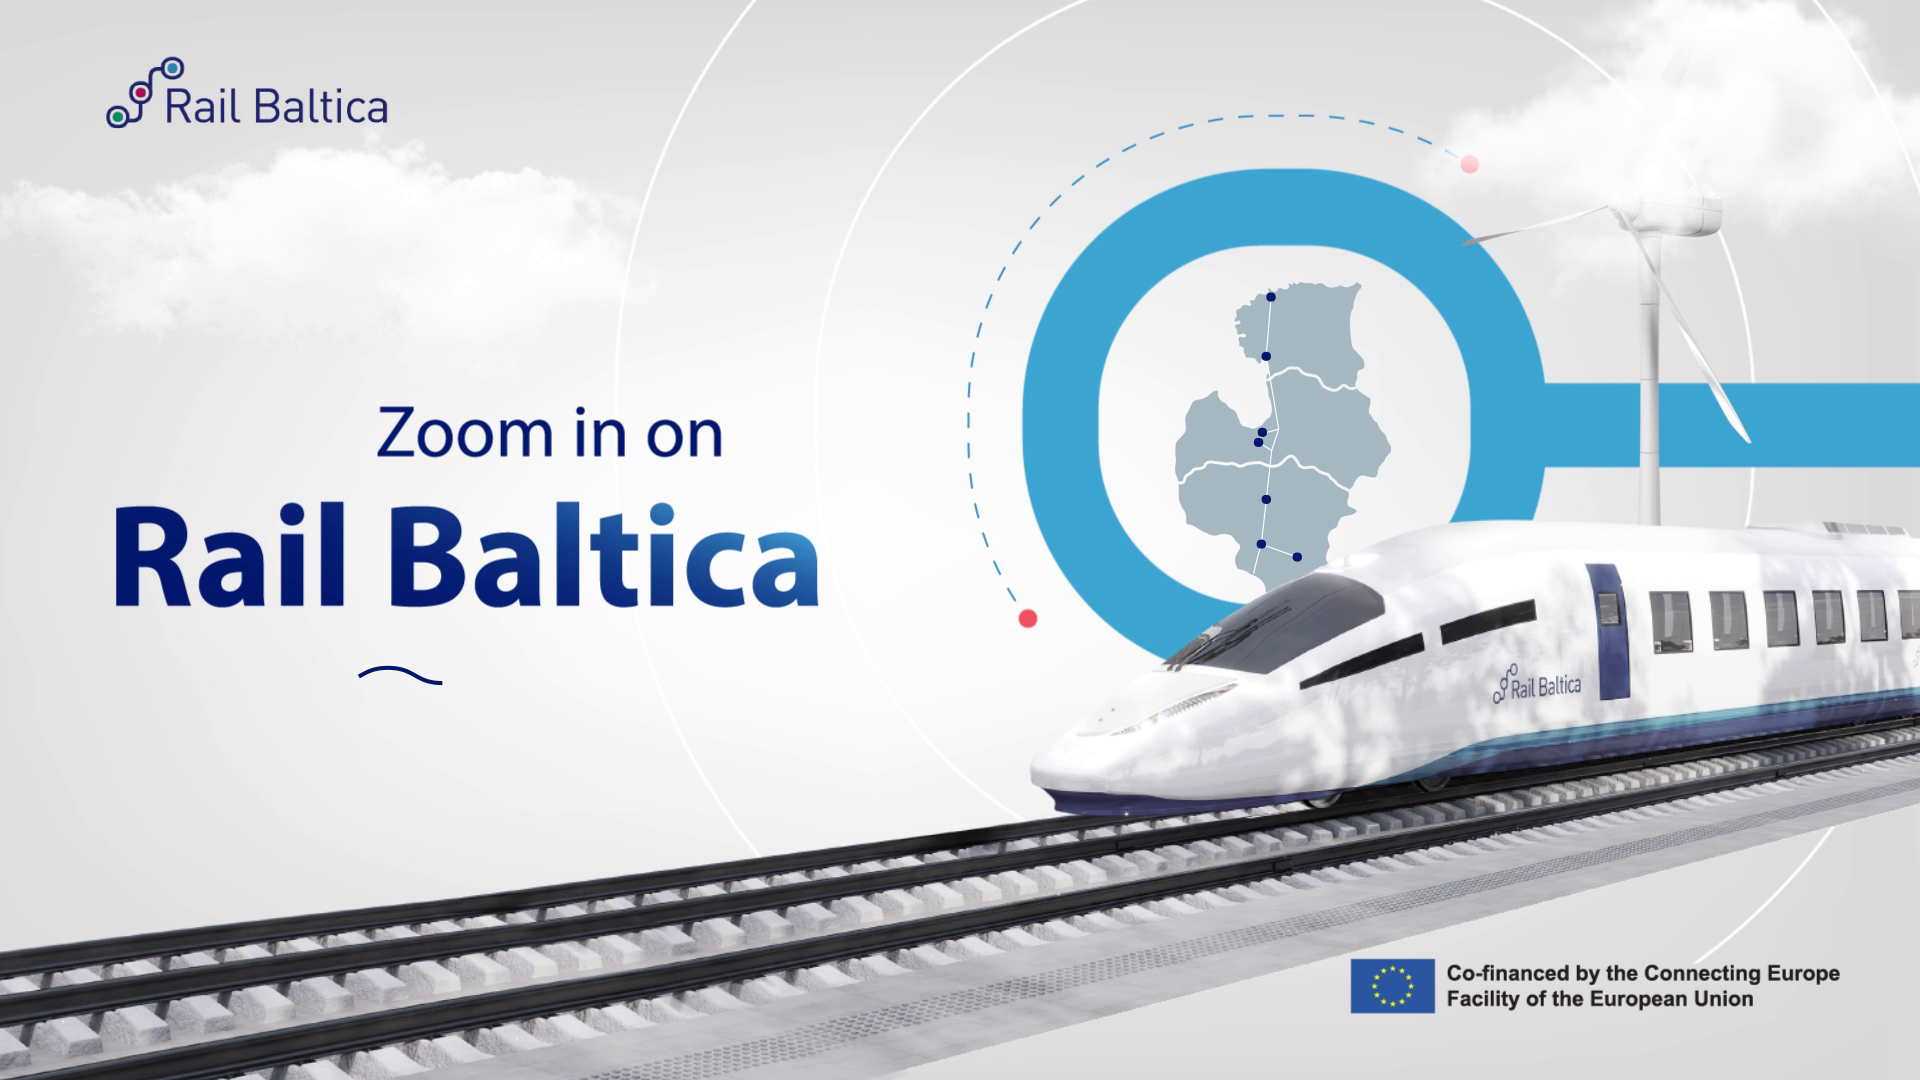 Zoom in on Rail Baltica